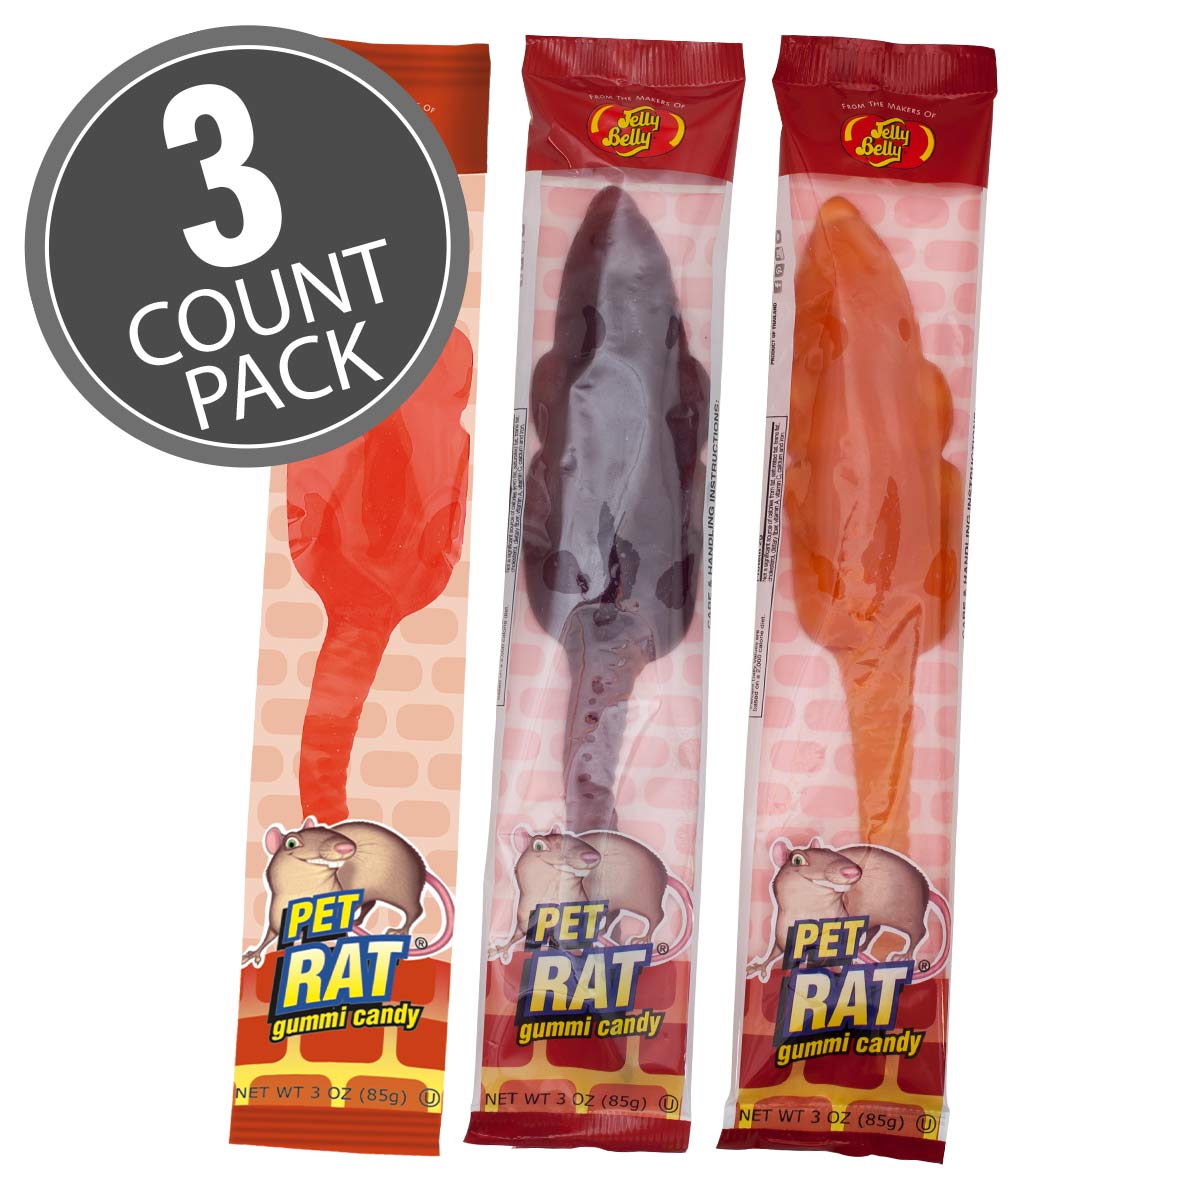 Jelly Belly Pet Rat Gummy Candy